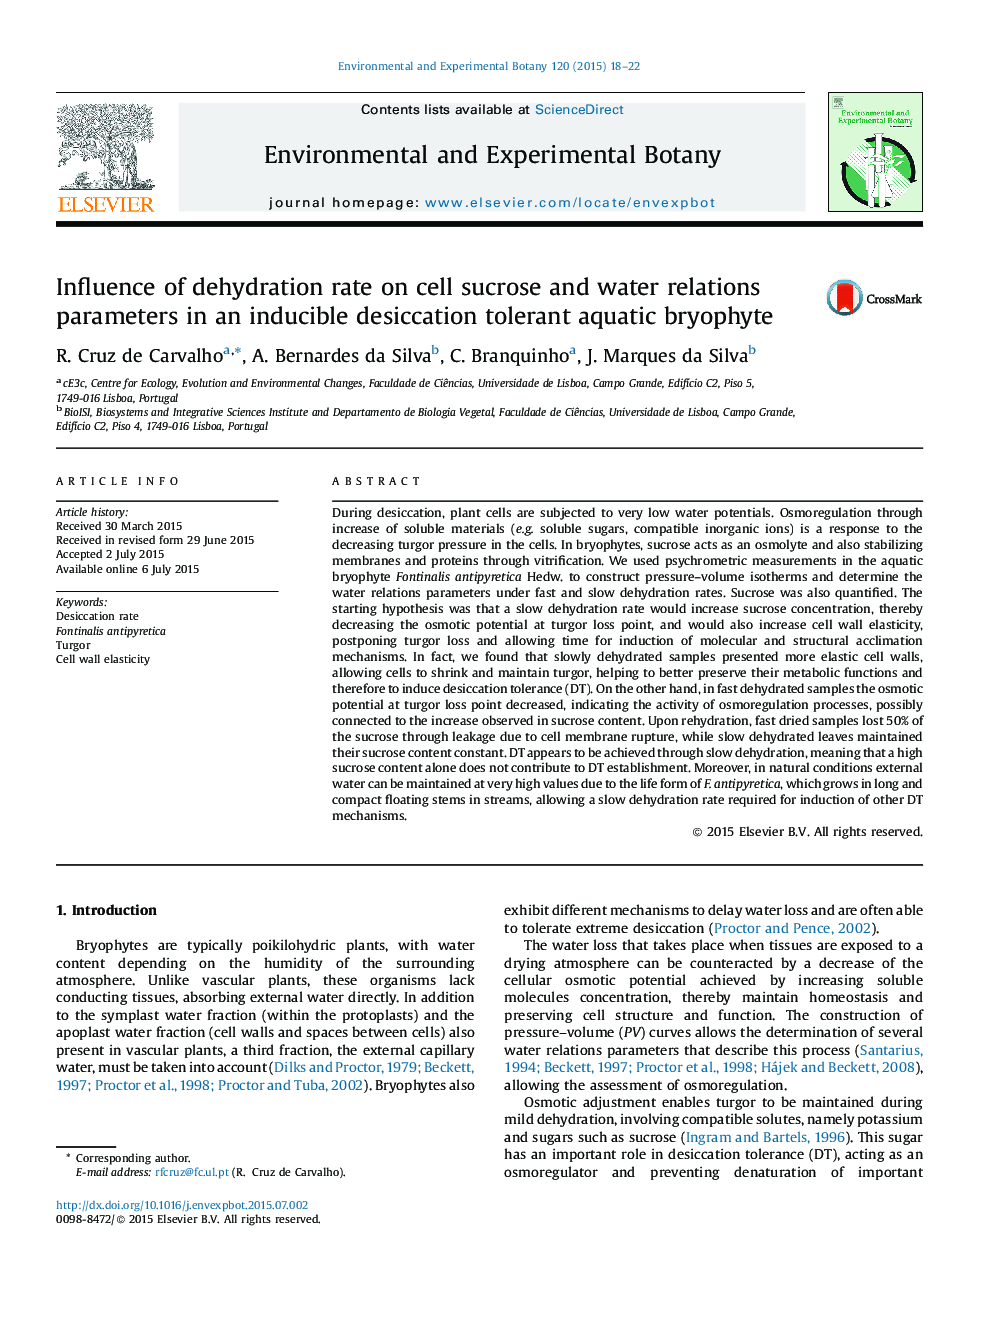 Influence of dehydration rate on cell sucrose and water relations parameters in an inducible desiccation tolerant aquatic bryophyte